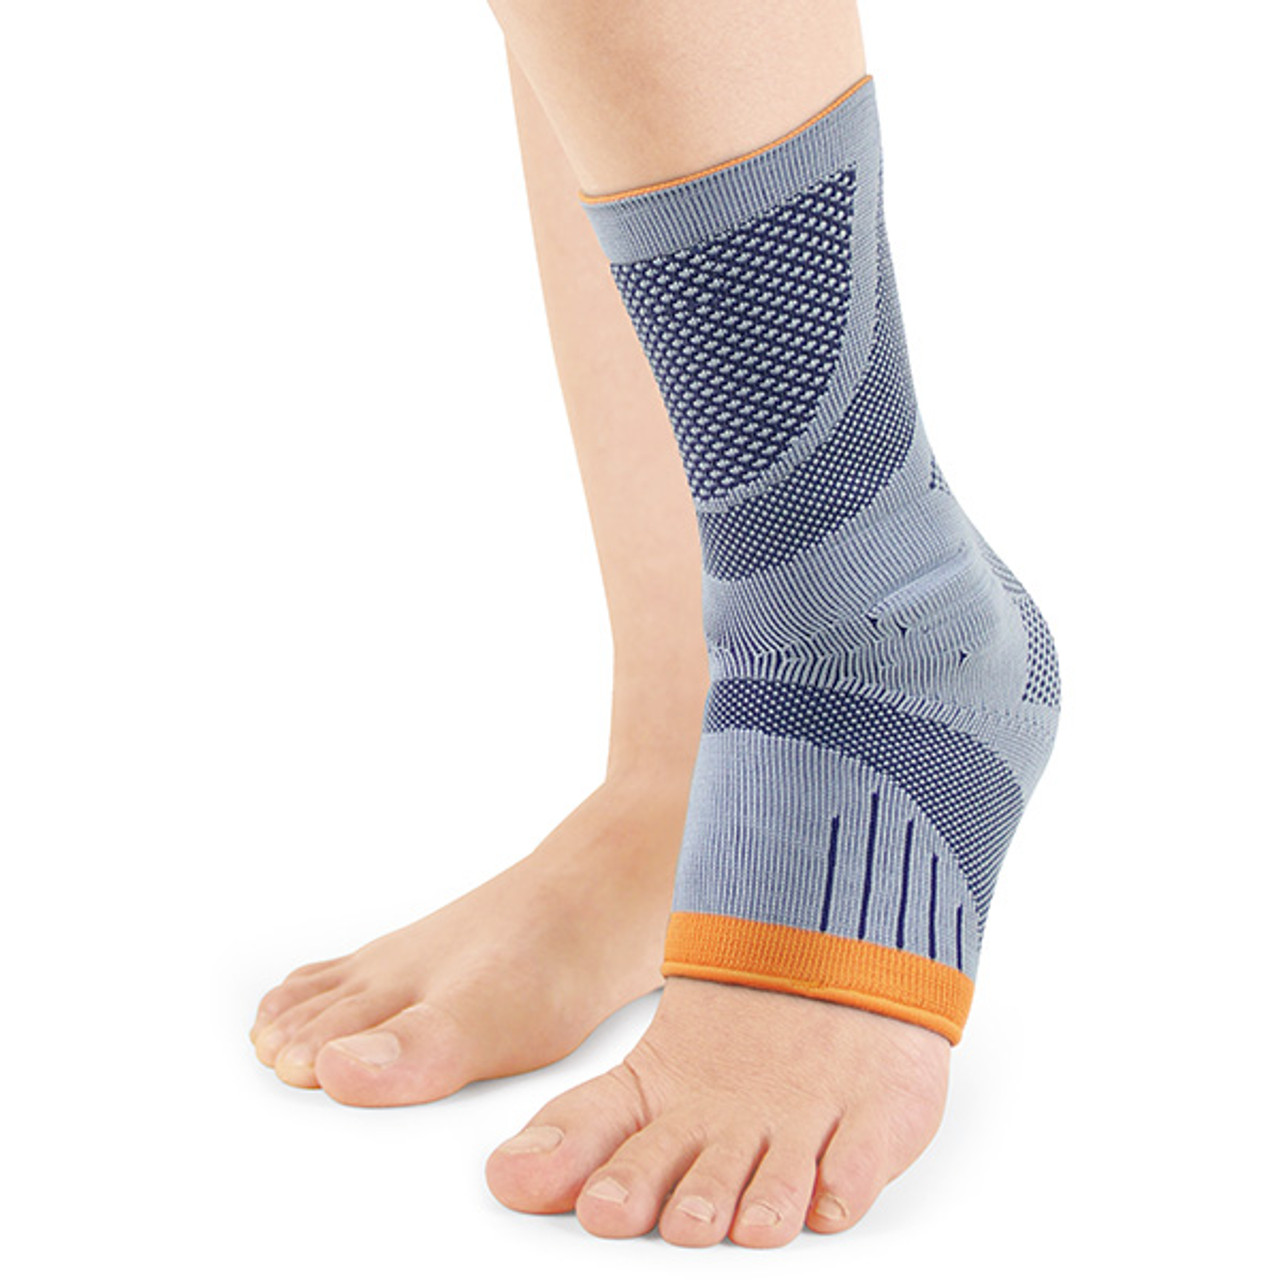 Orthoactive 5571 3D Elastic Ankle Support Large